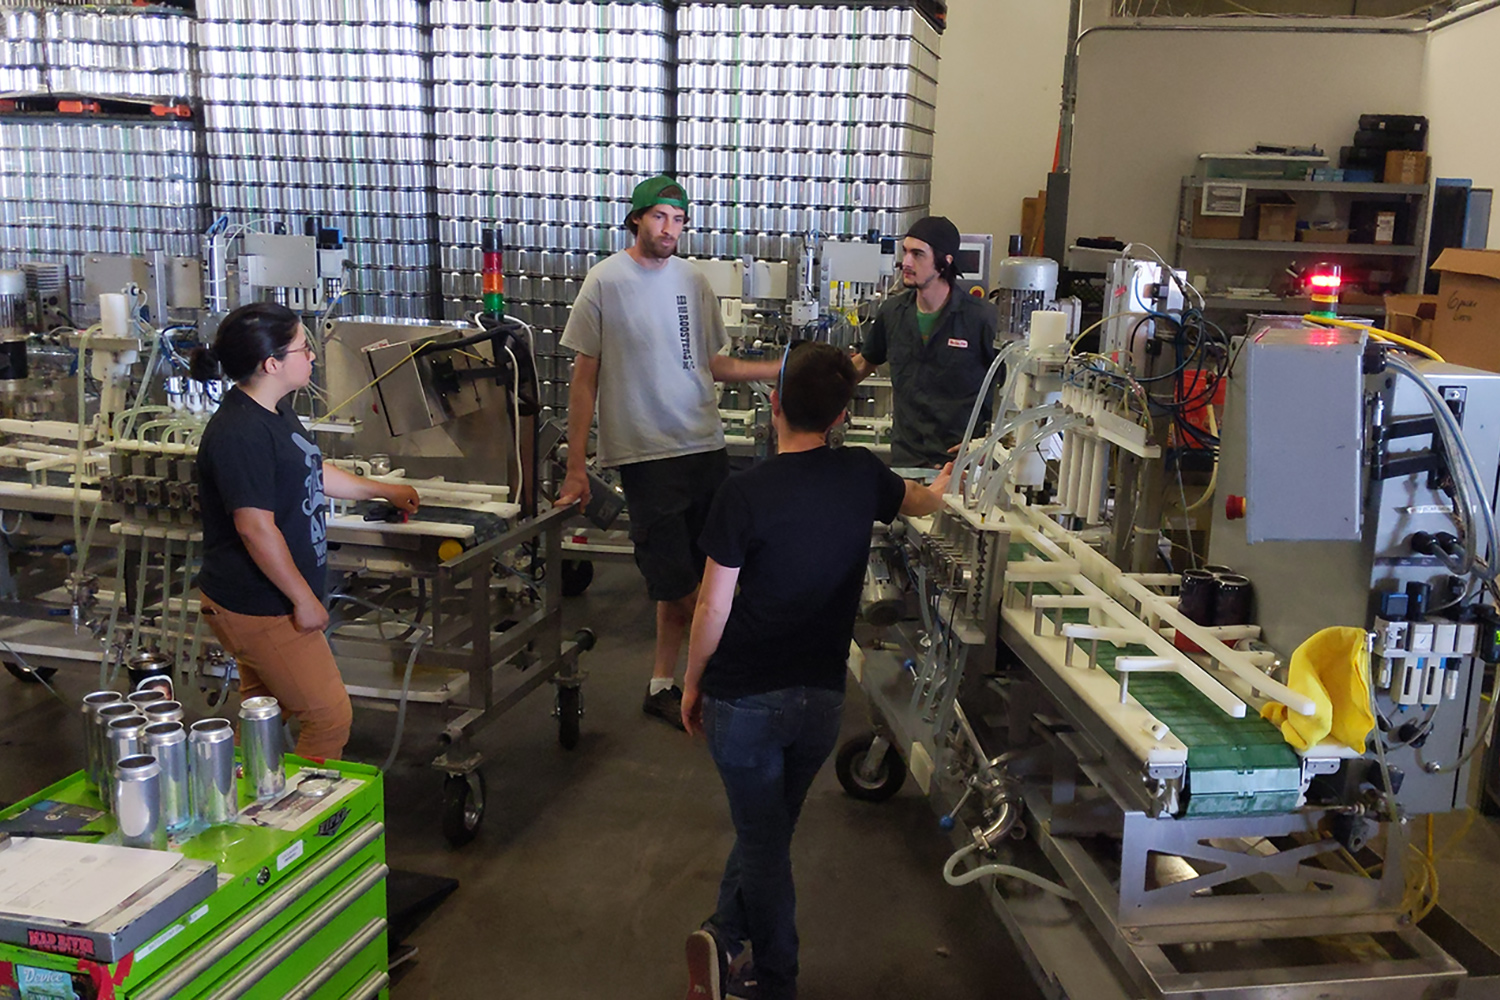 Sarah, Wade, Lindsey, and Camreon having a chat in the warehouse next to a couple of the canning lines